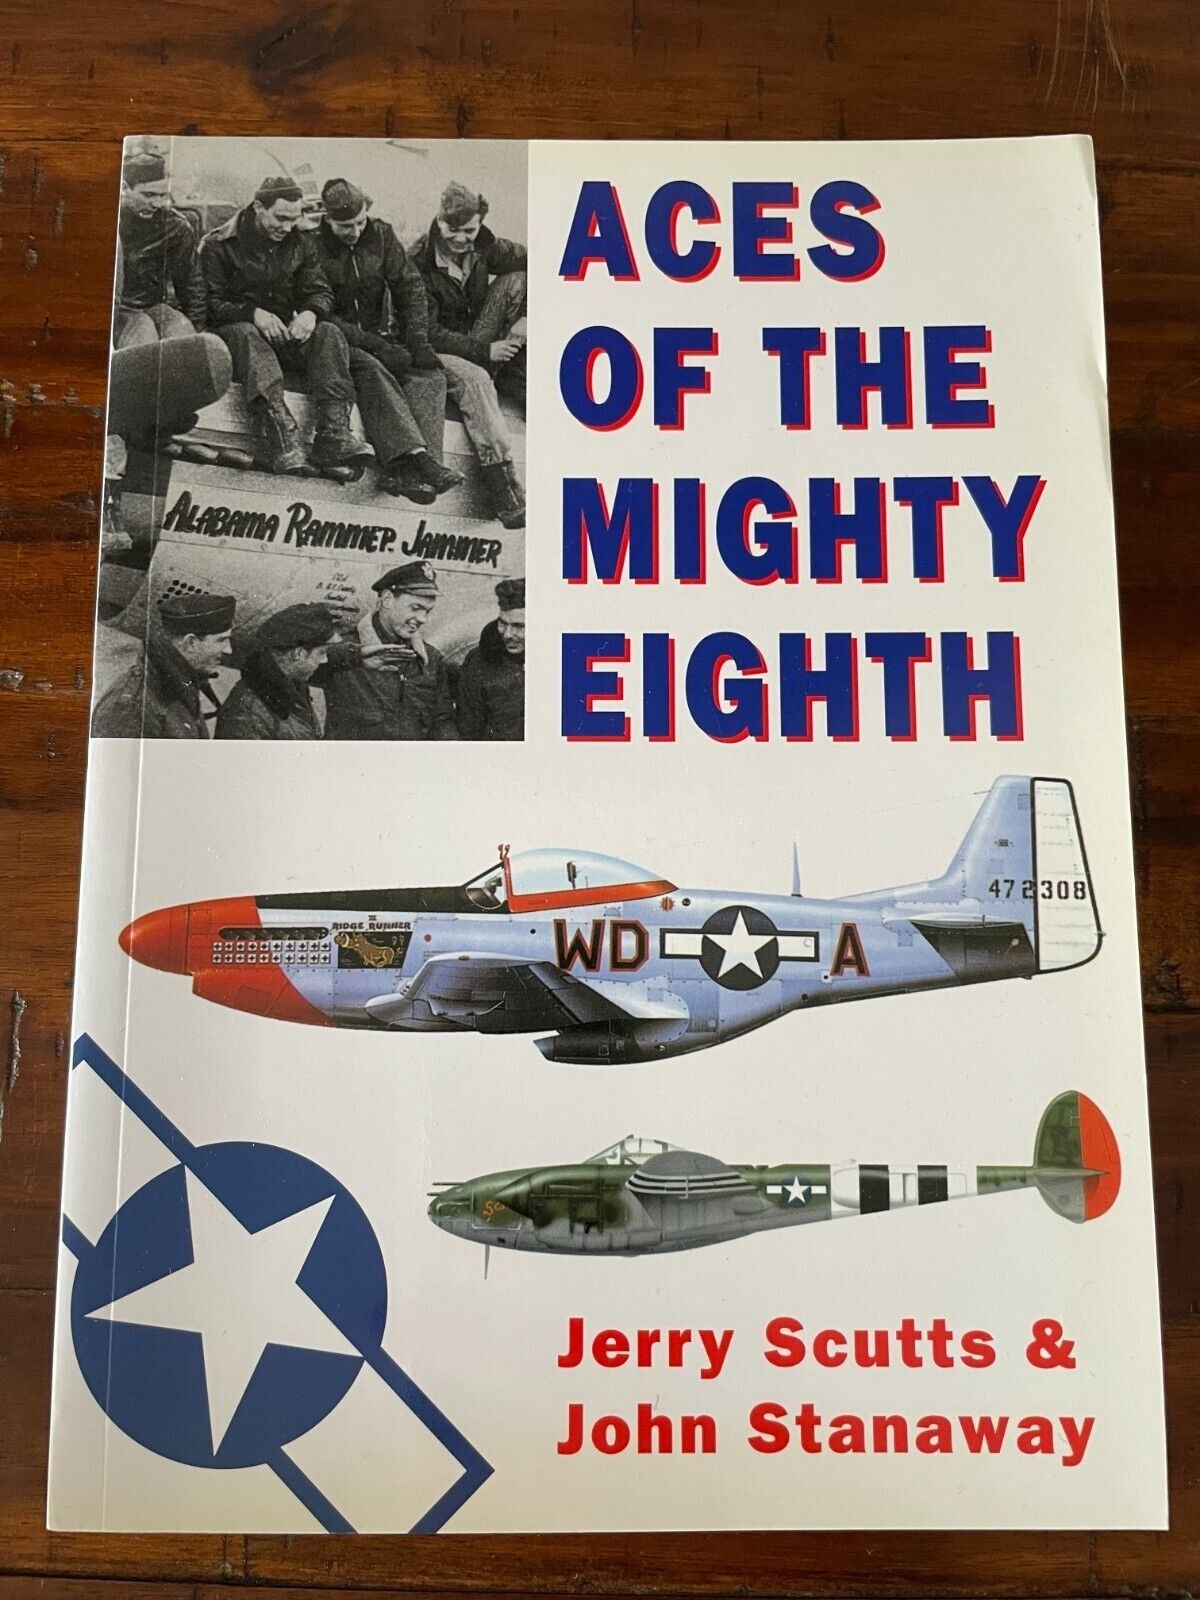 Aces of the Mighty Eighth, 286 pages